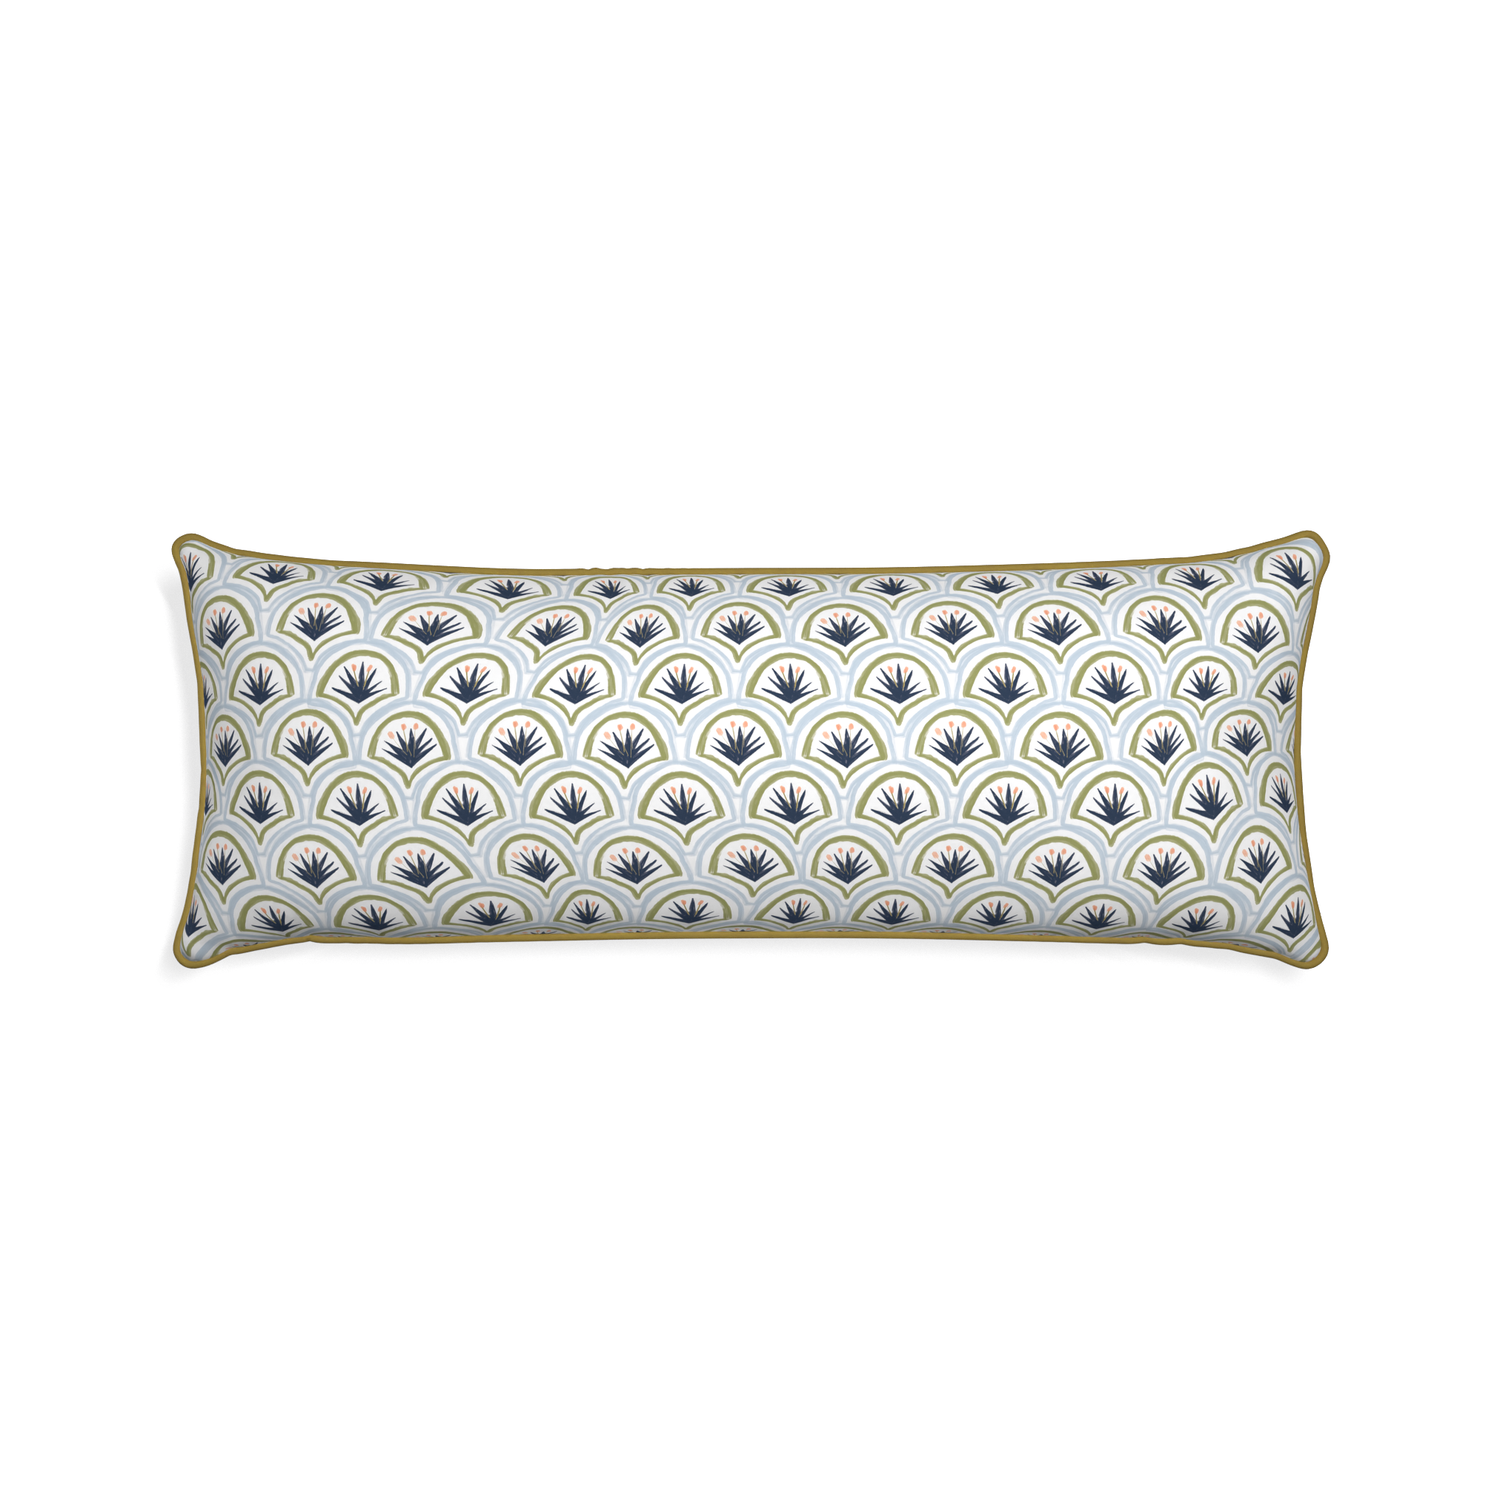 Xl-lumbar thatcher midnight custom art deco palm patternpillow with c piping on white background